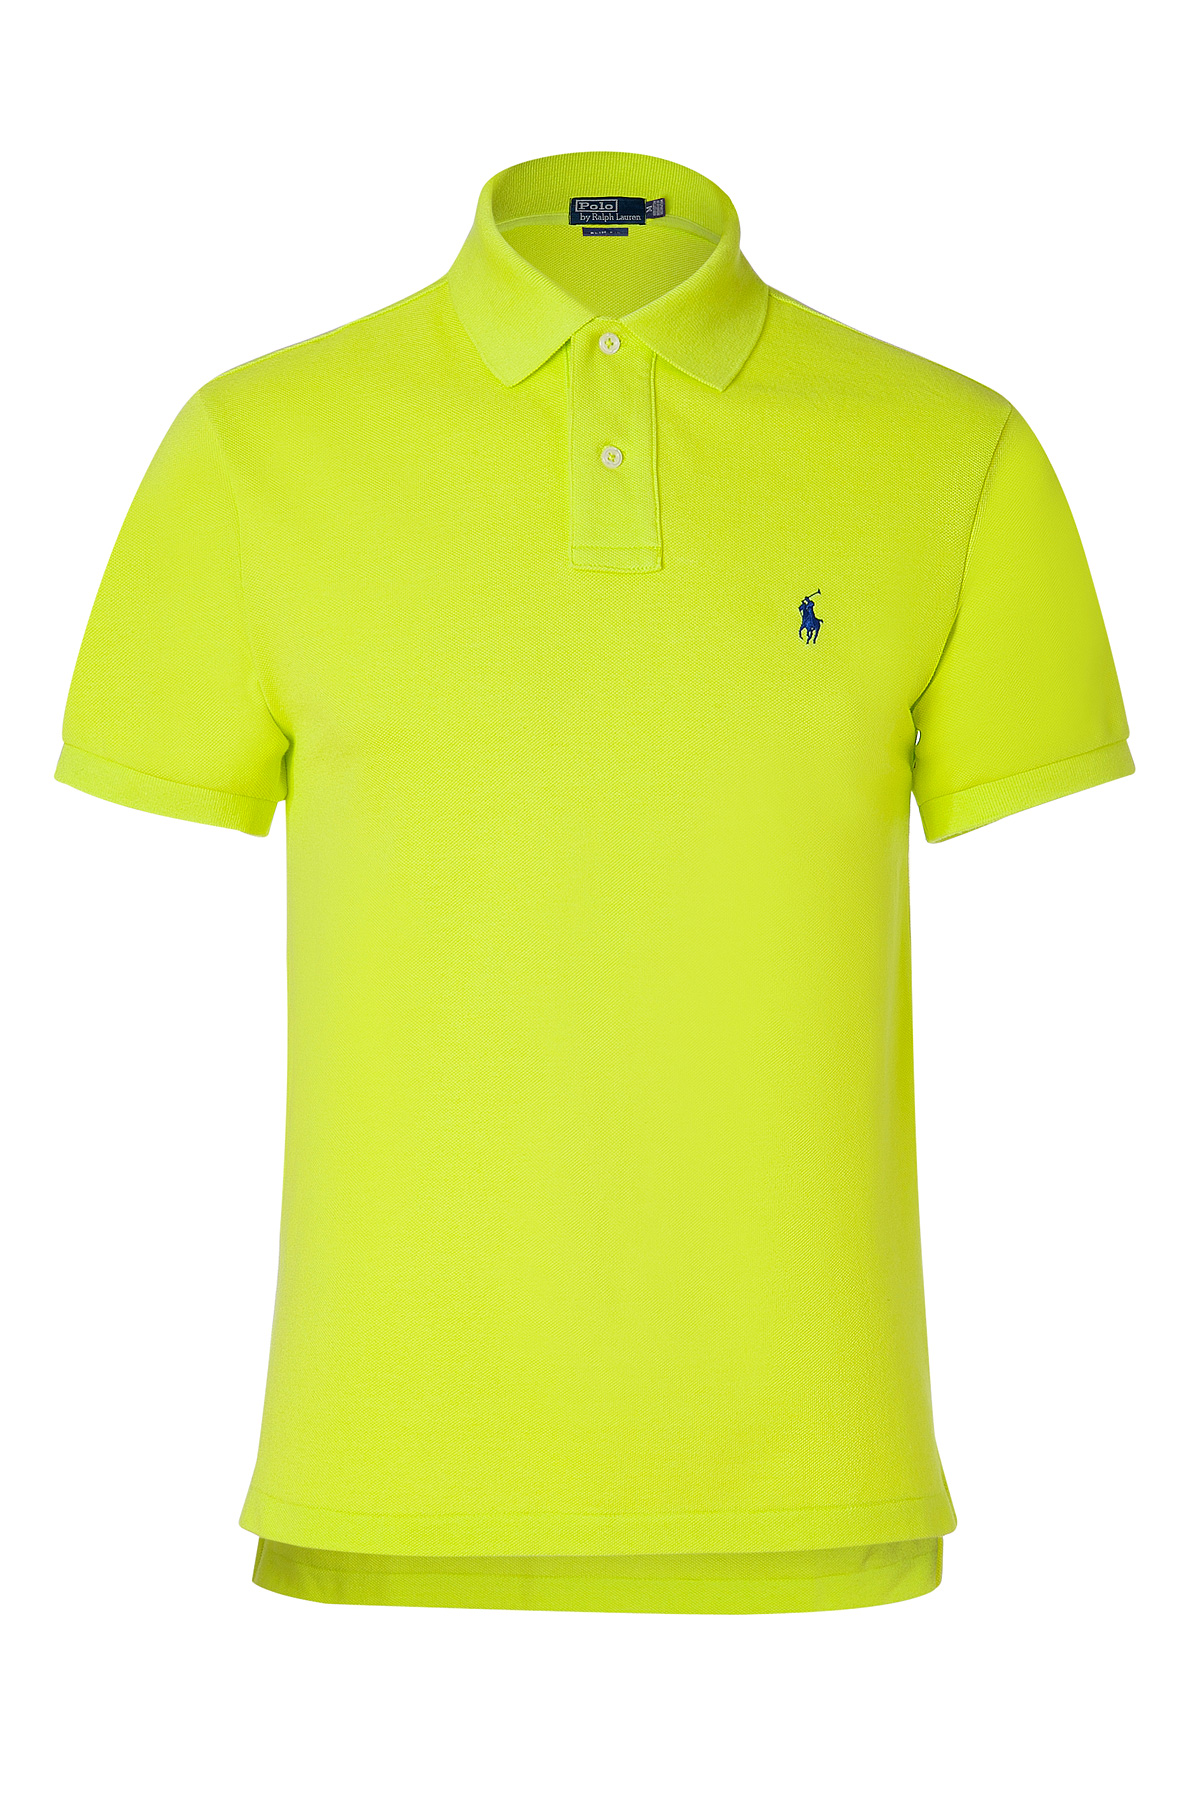 Ralph lauren New Lemon Solid Weathered Mesh Slim Fit Polo Shirt in ...